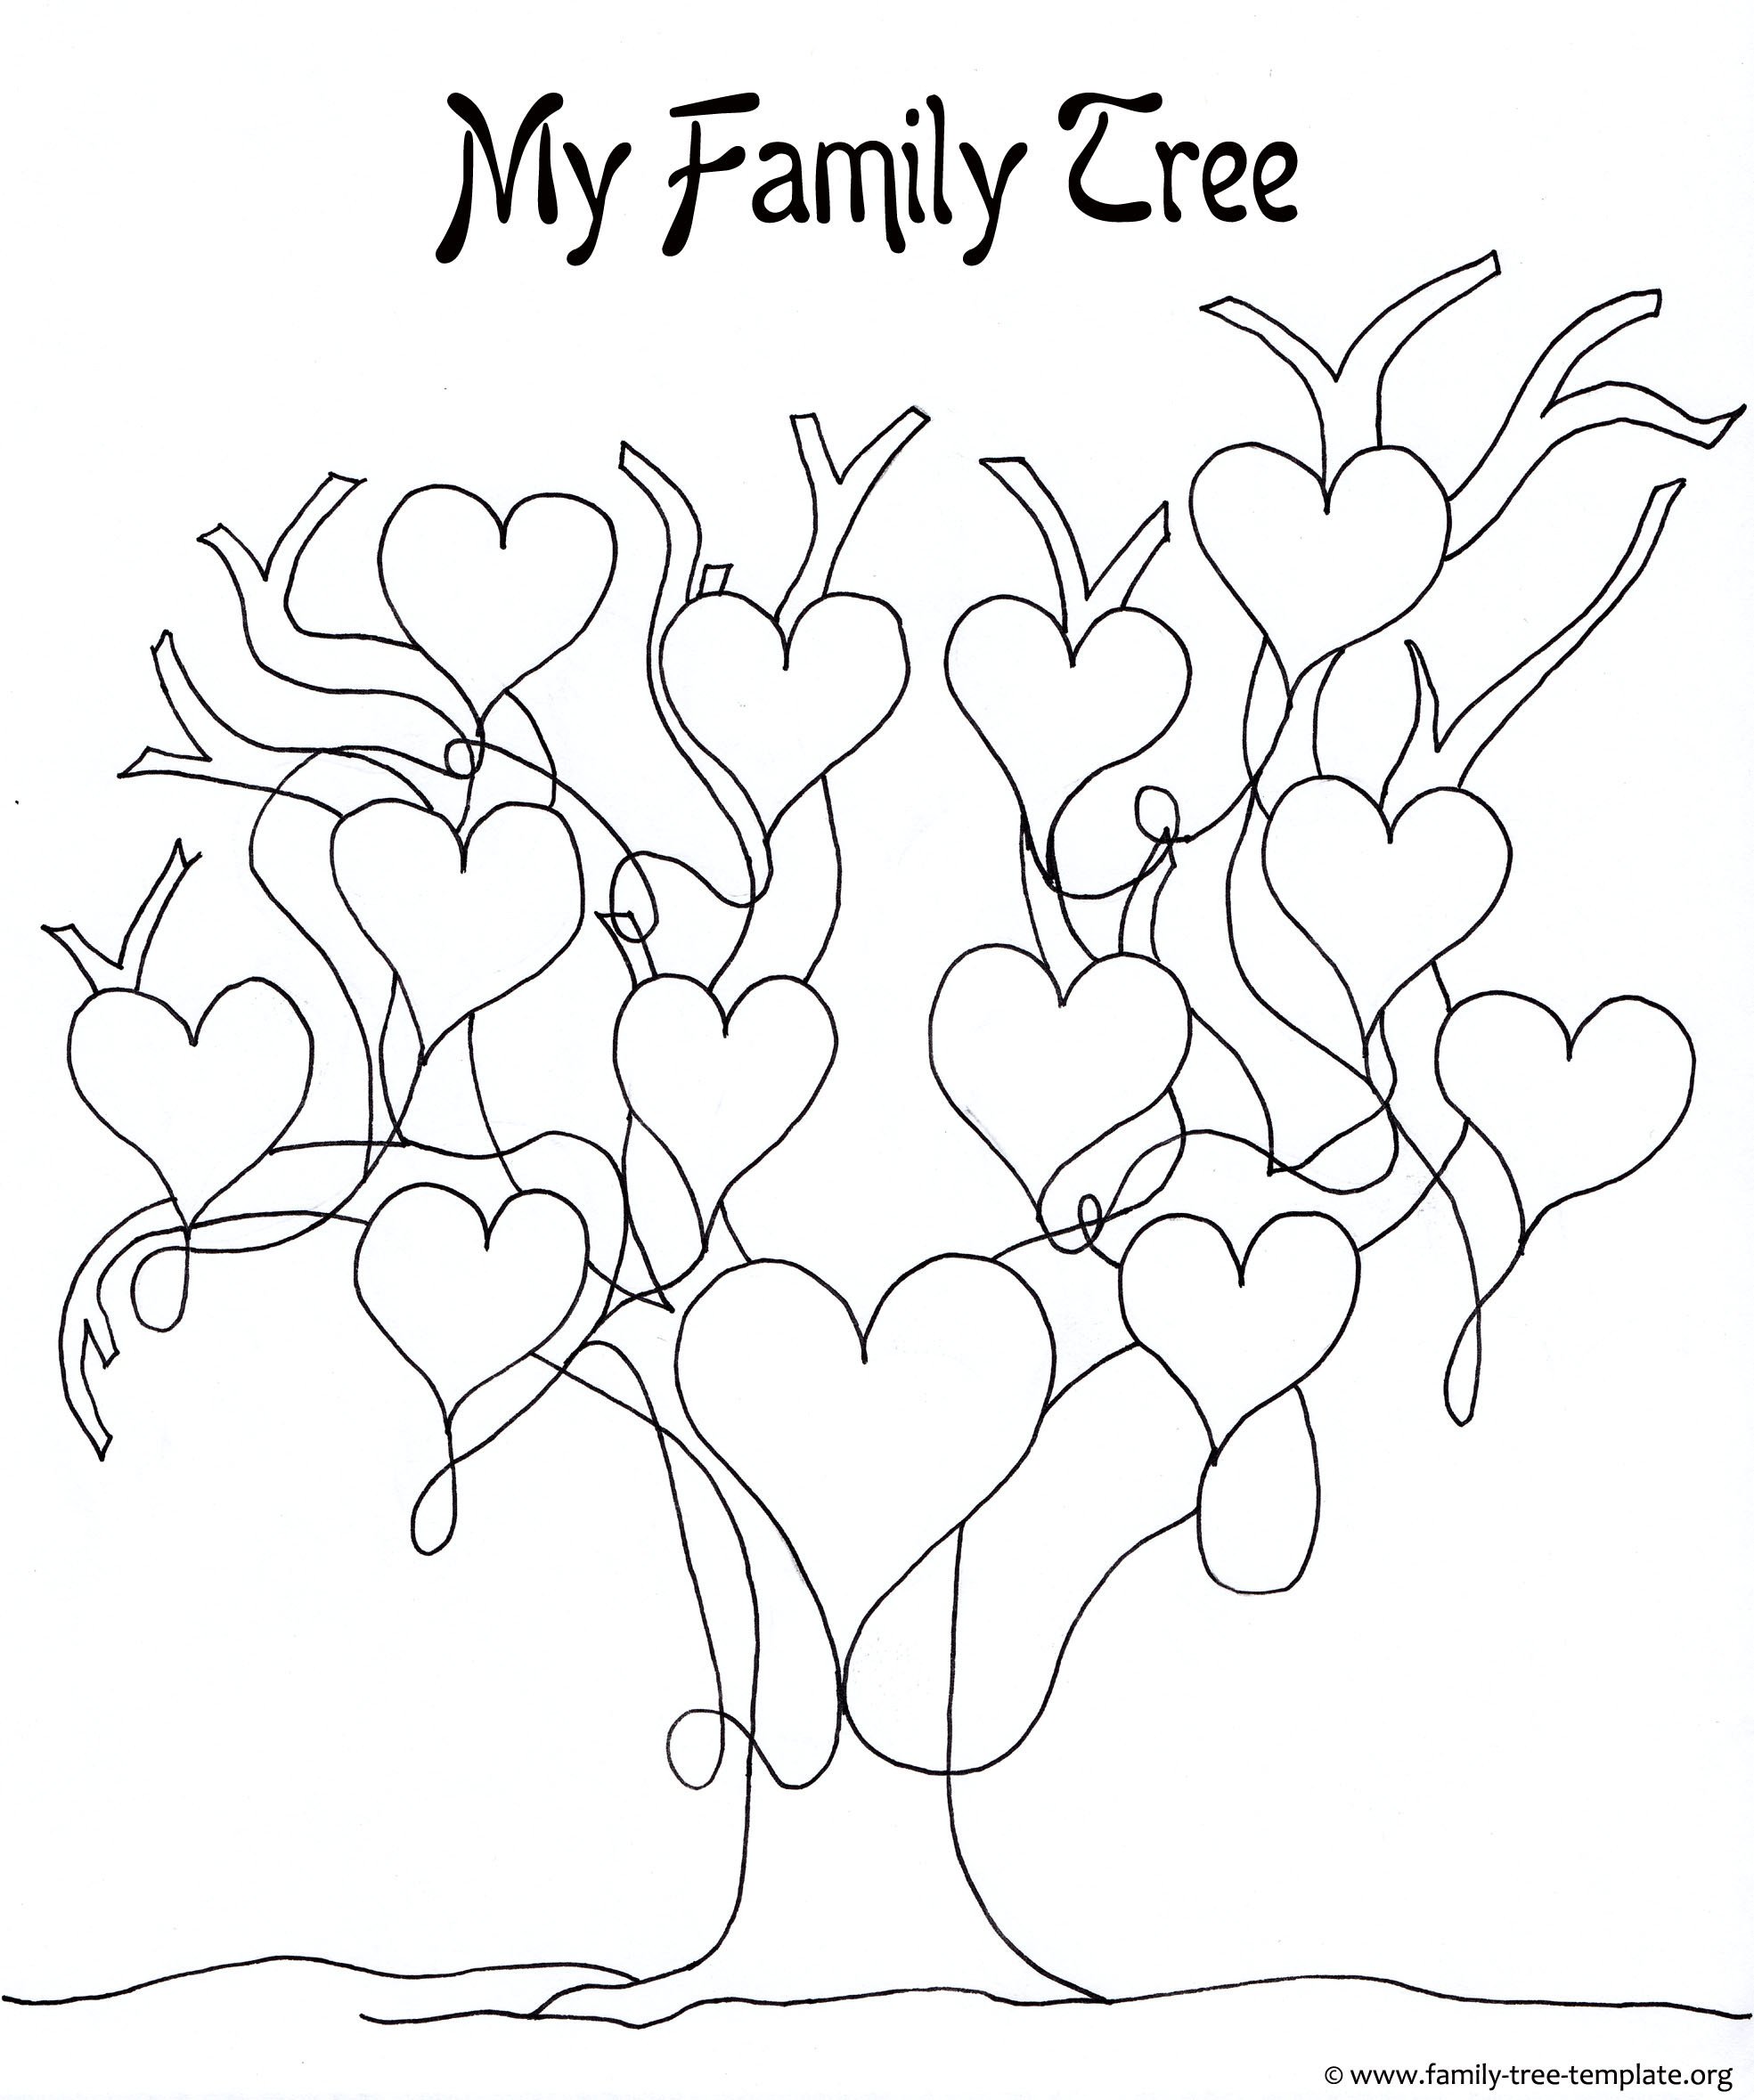 Family Tree with Pictures Template A Printable Blank Family Tree to Make Your Kids Genealogy